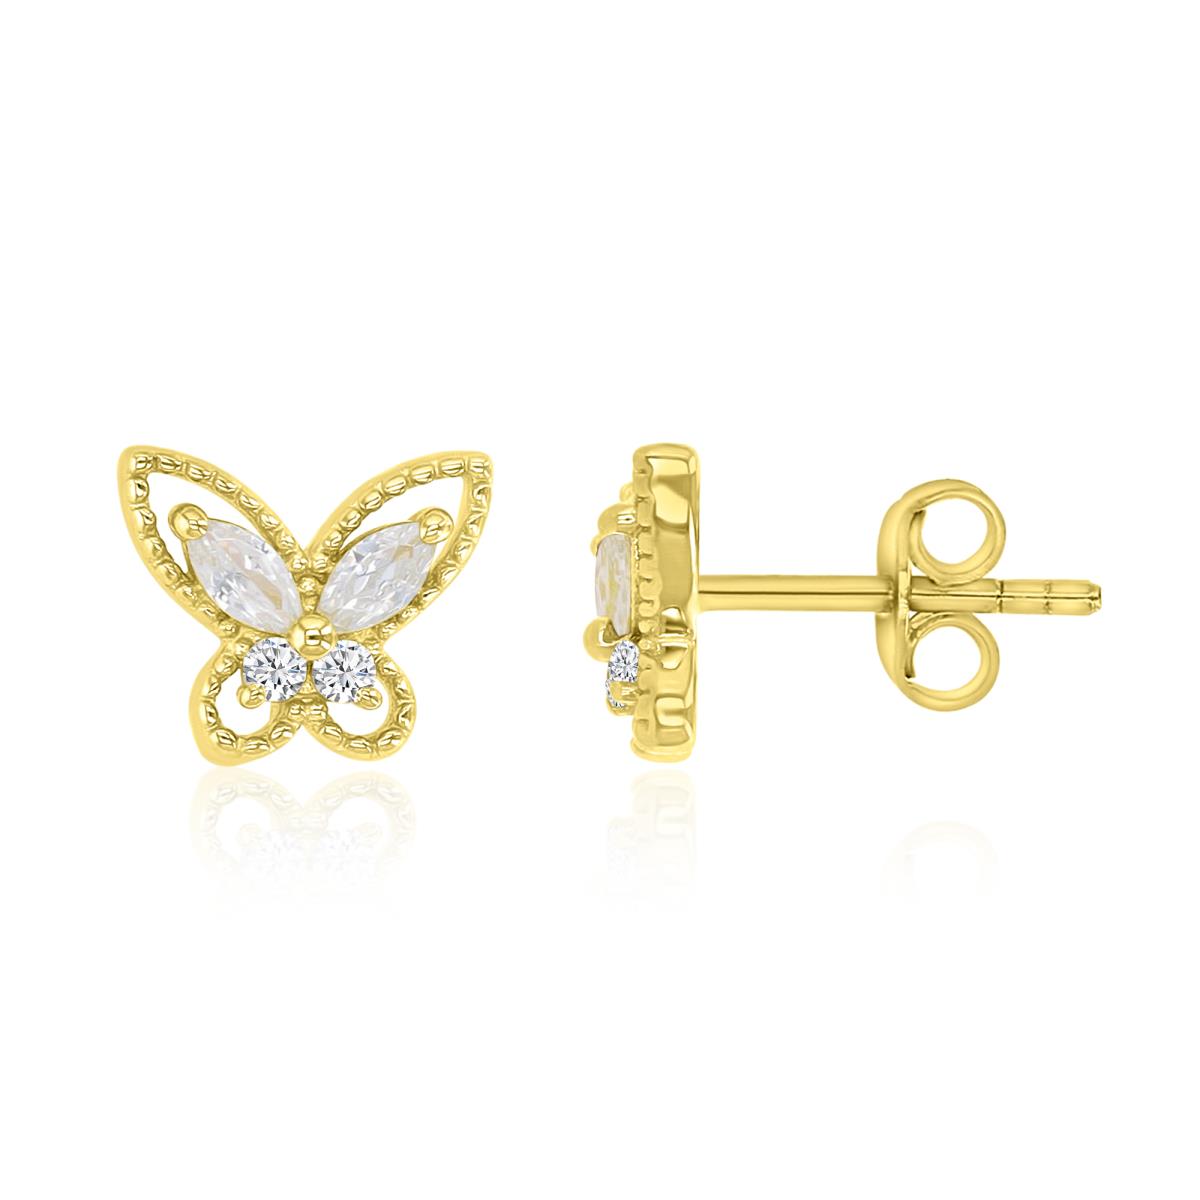 Sterling Silver Yellow 9.5X8MM Polished White CZ Butterfly Stud Earrings